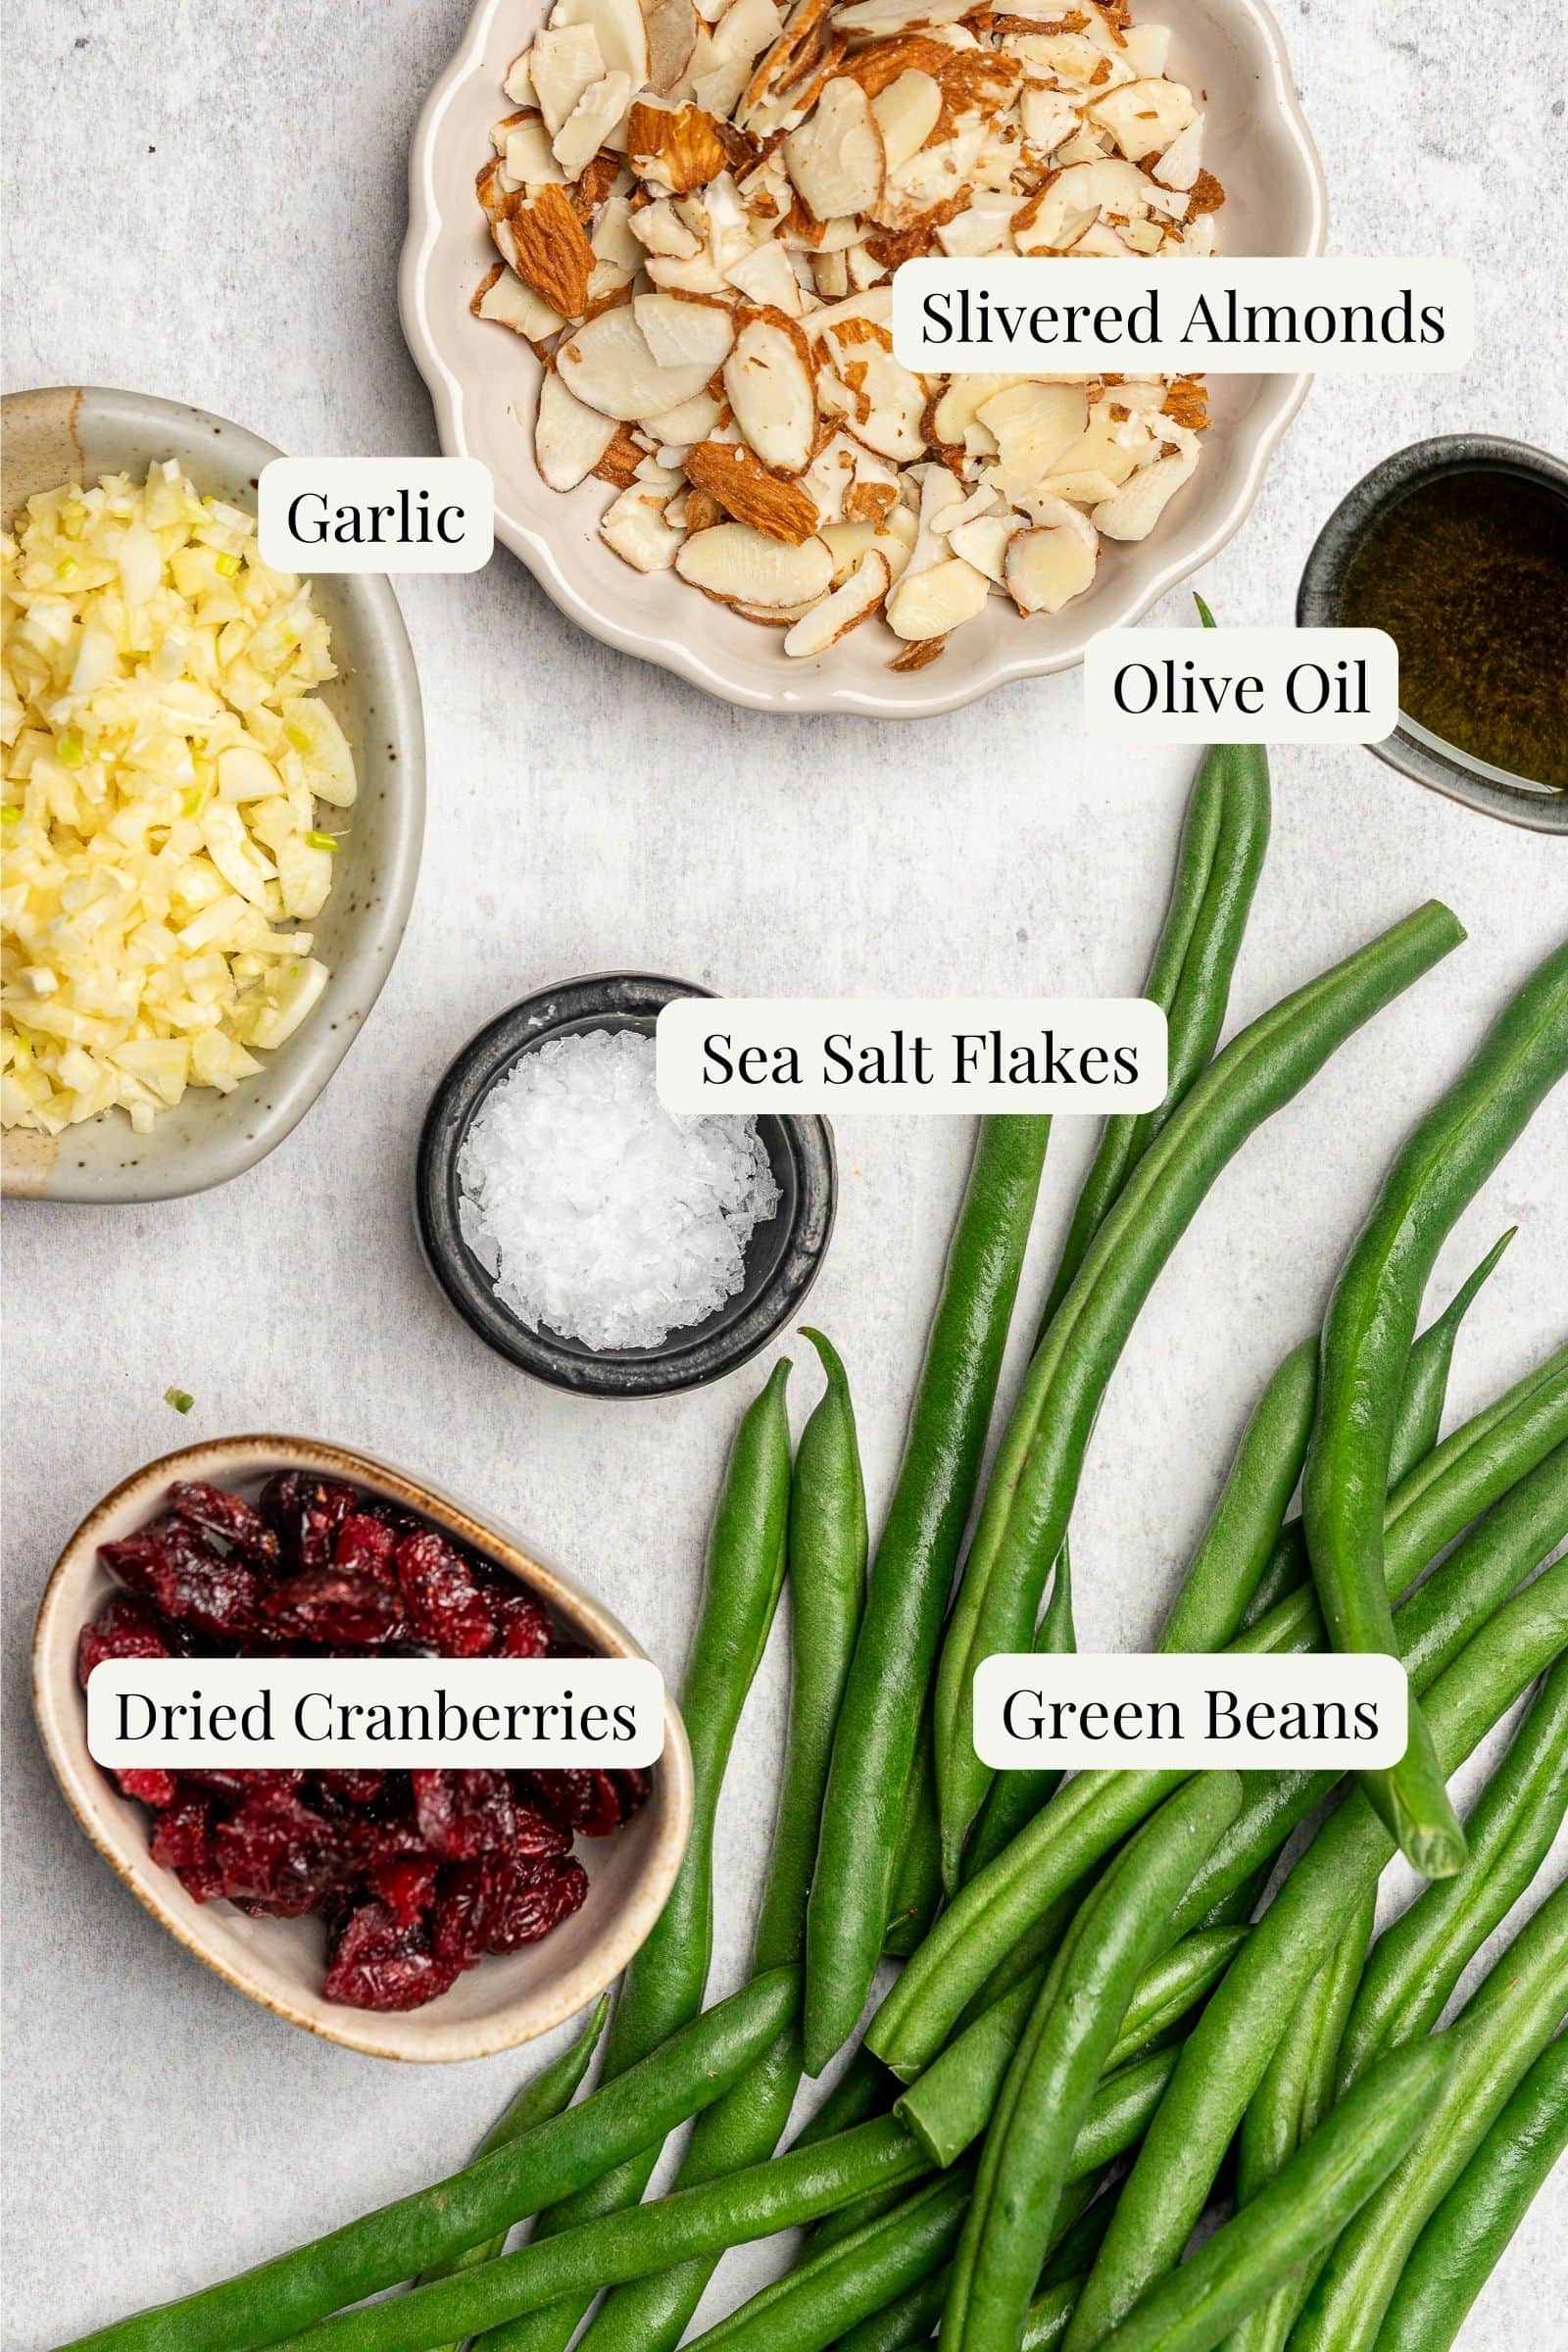 Ingredients for green beans with cranberries and almonds separated into small bowls and labeled.